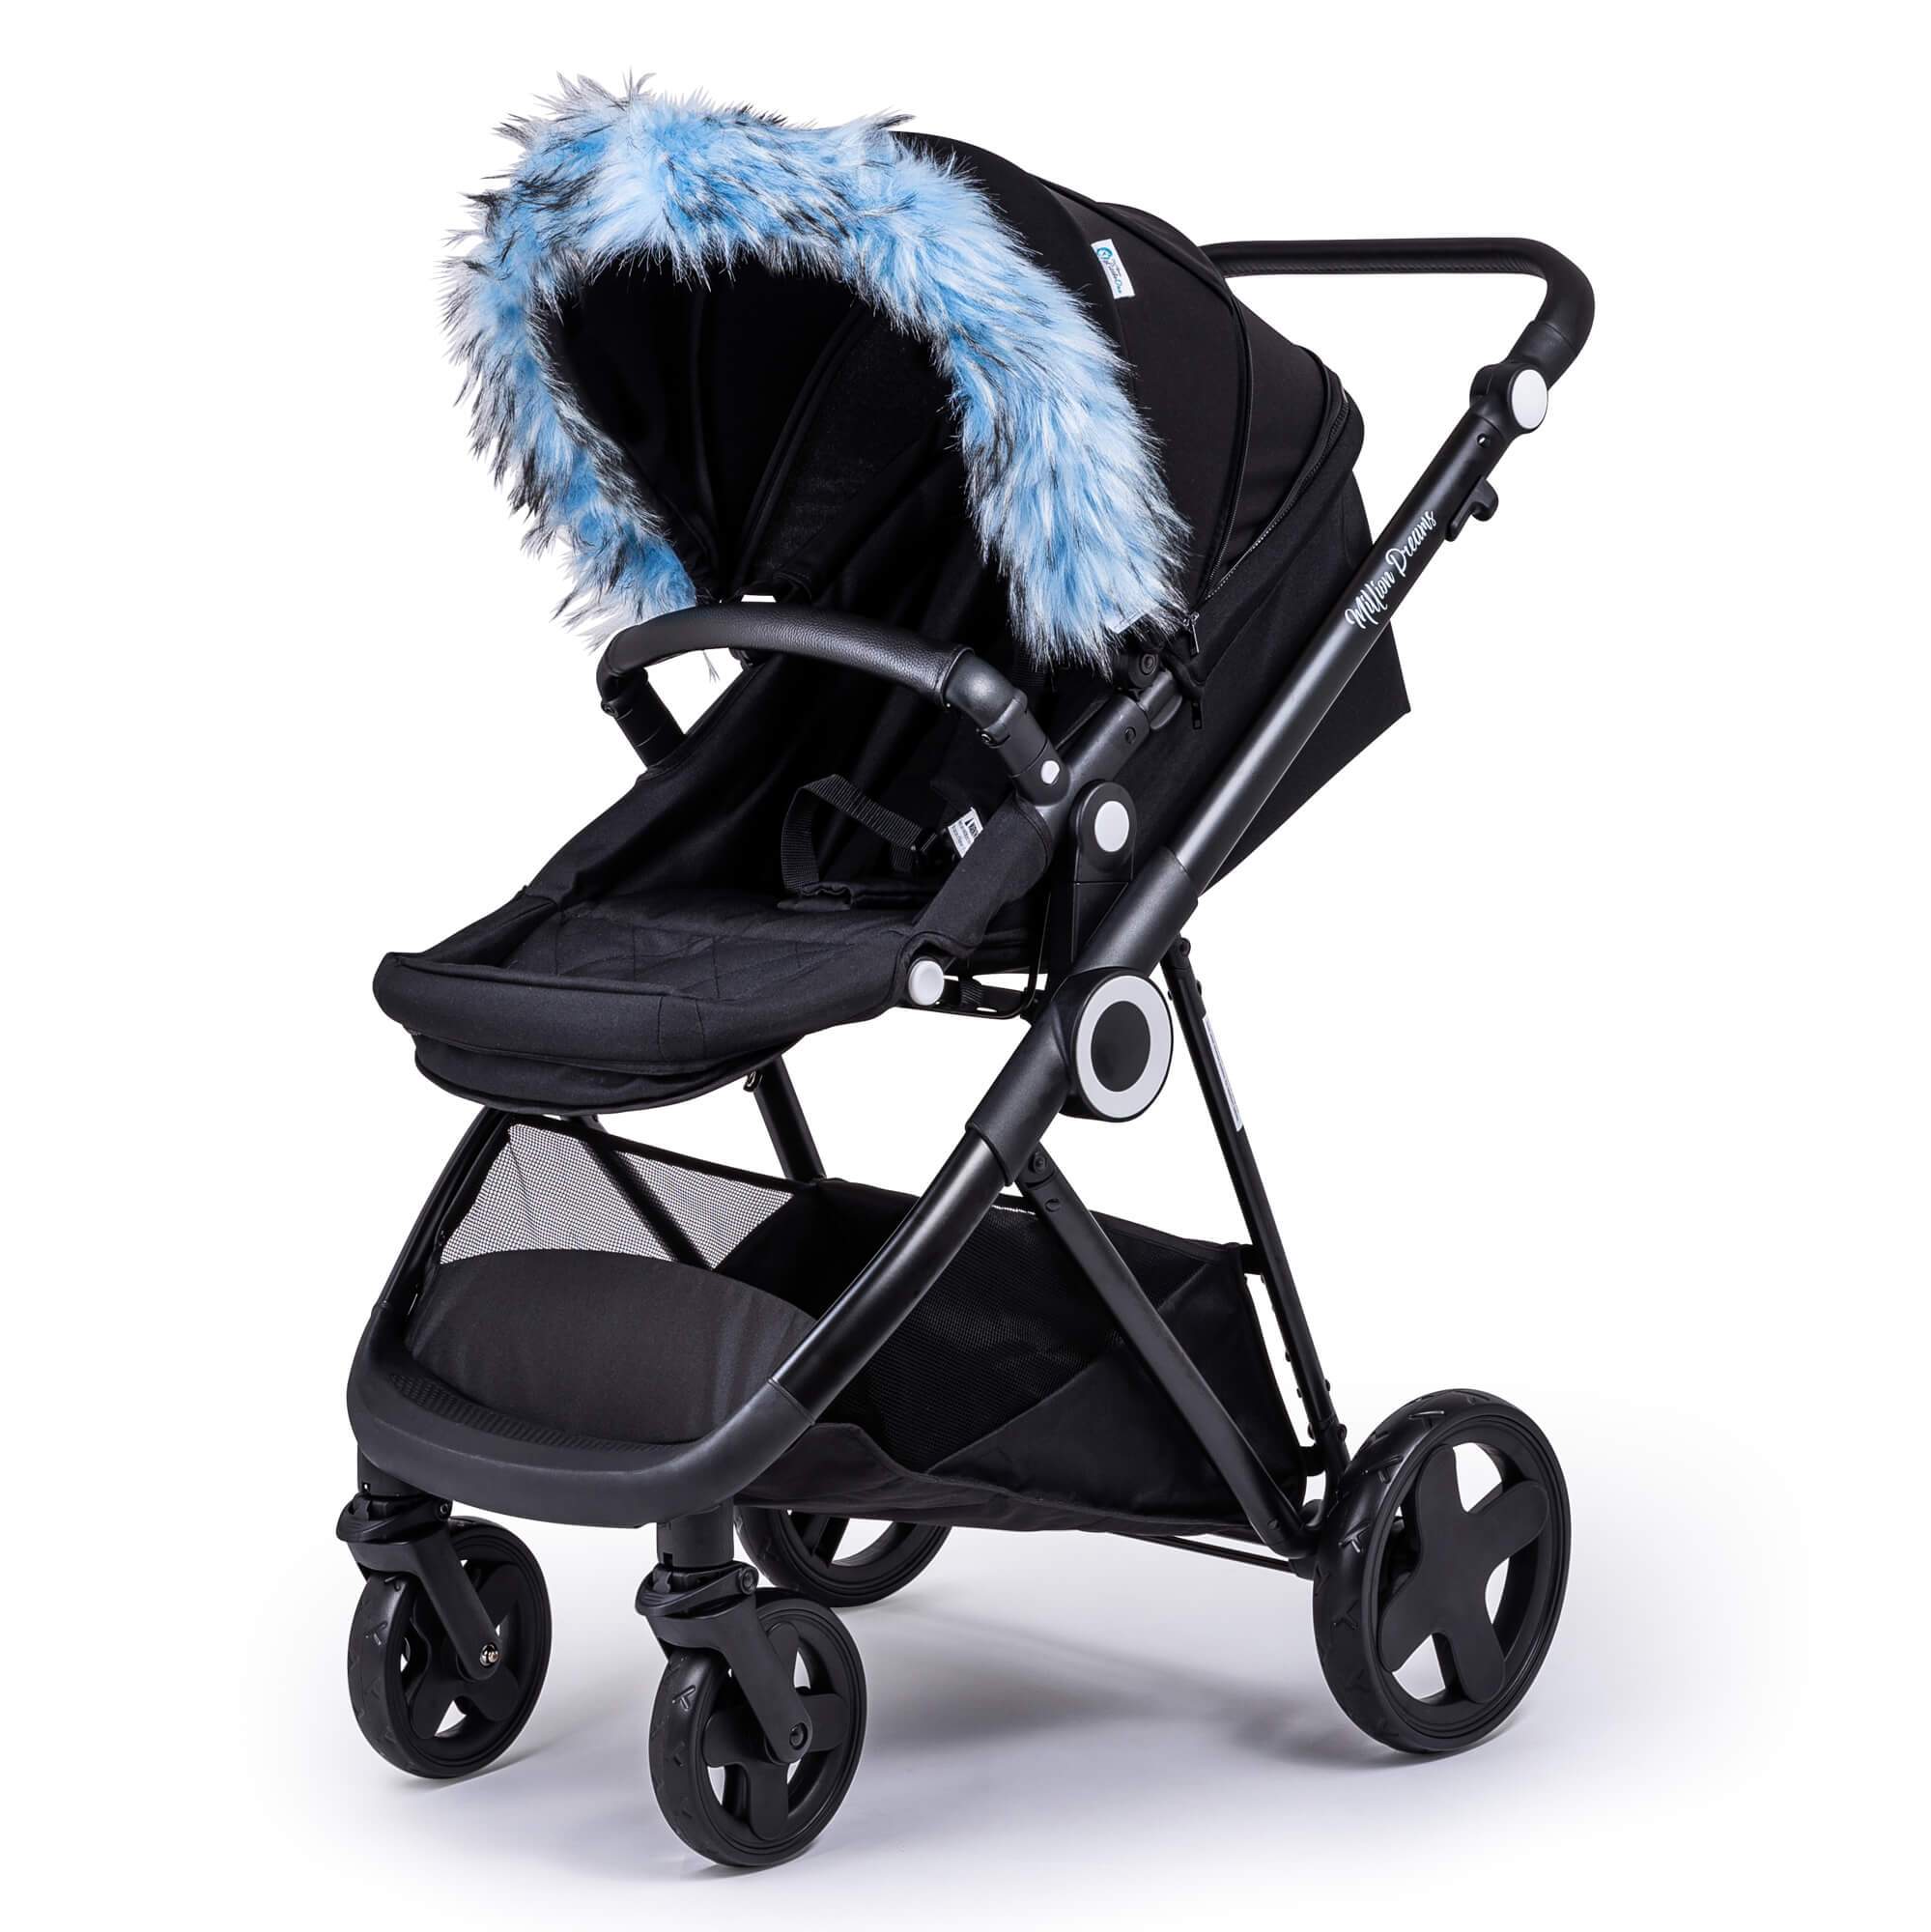 Pram Fur Hood Trim Attachment for Pushchair Compatible with Cosatto - Light Blue / Fits All Models | For Your Little One